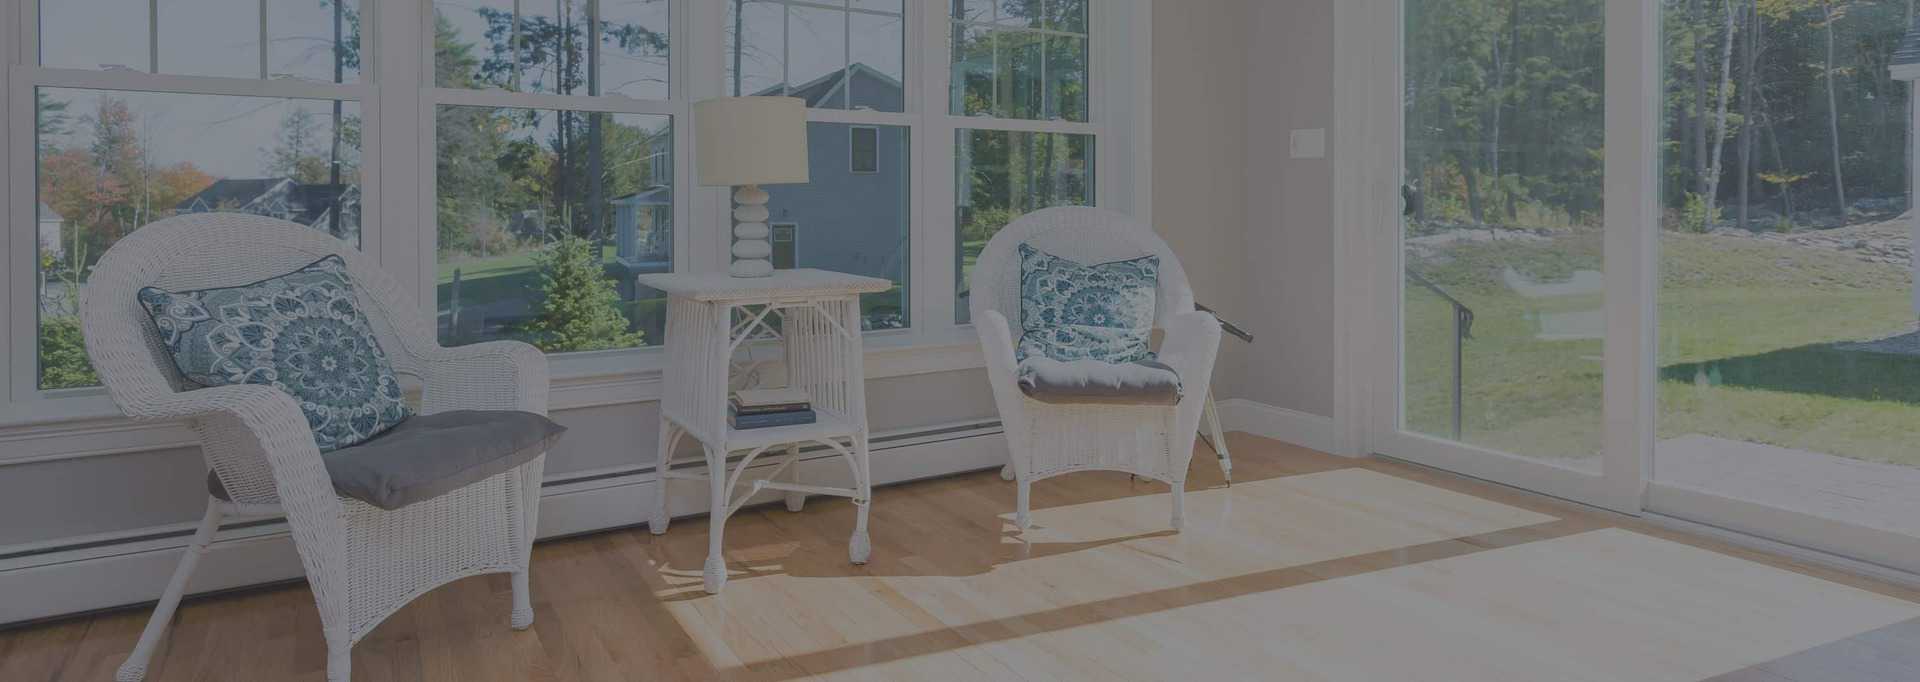 White wicker furniture in sun room with large windows and wood floors.